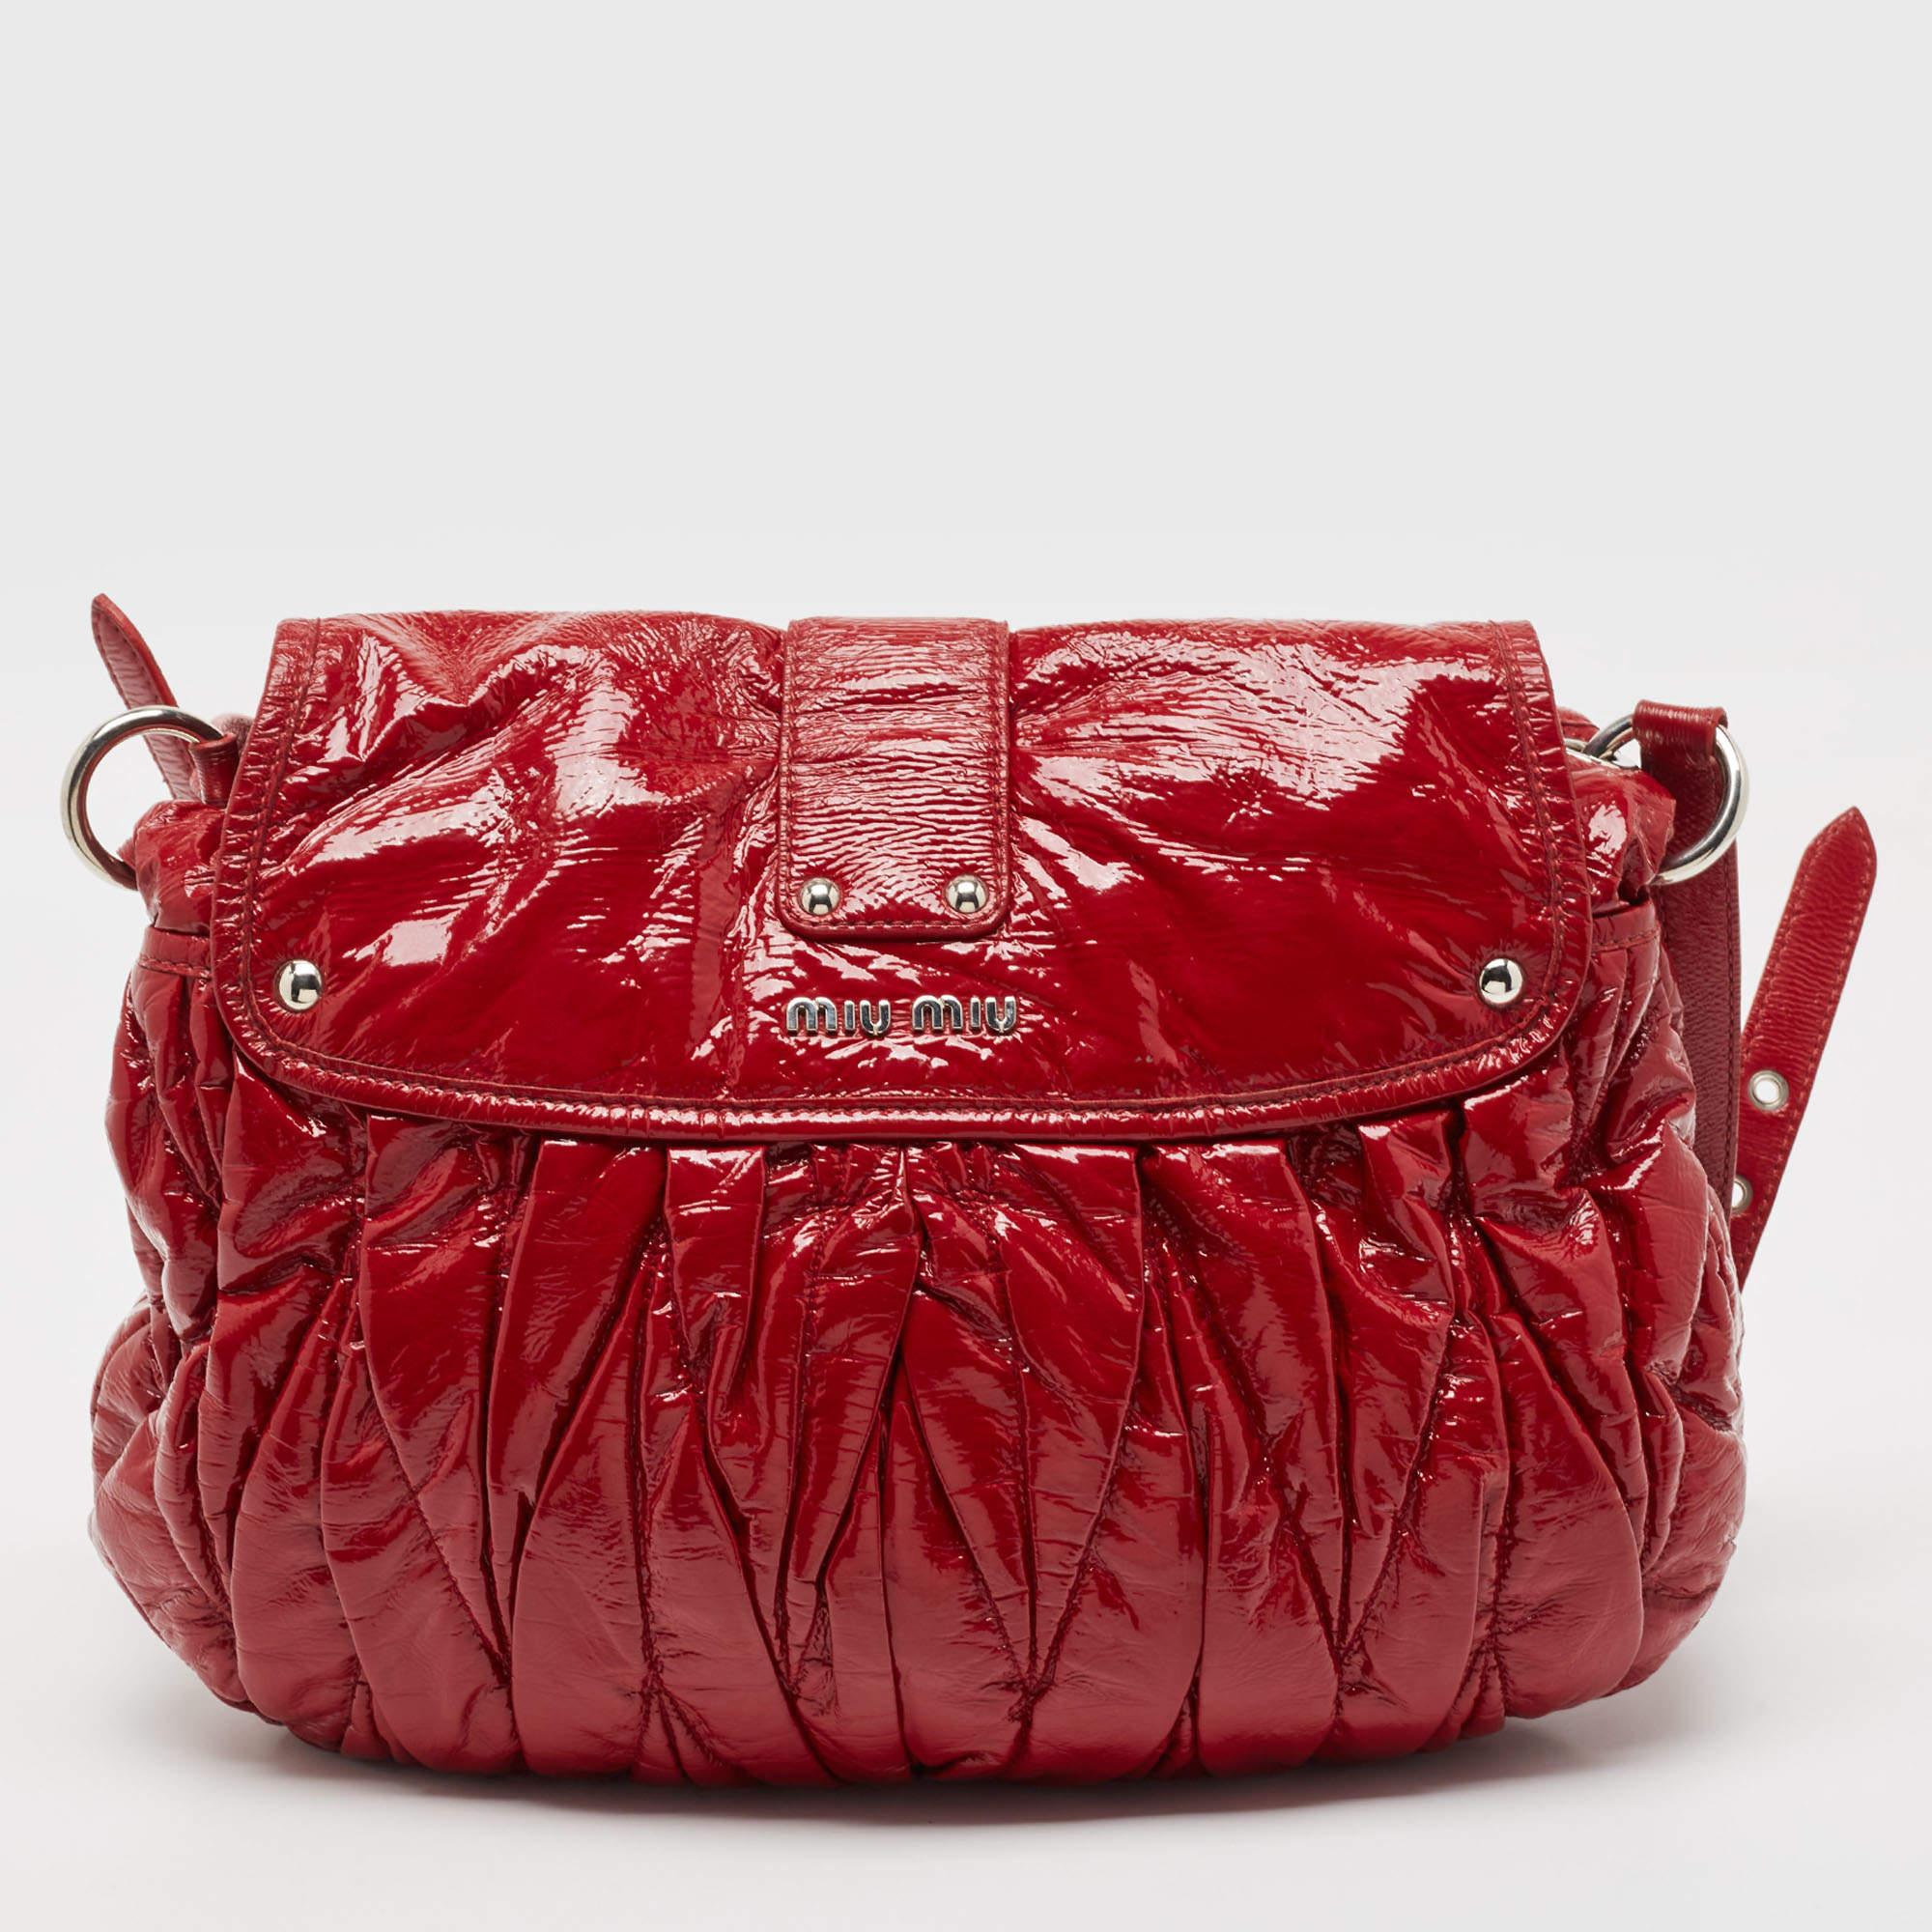 The simple silhouette and the use of durable materials for the exterior bring out the appeal of this Miu Miu red bag for women. It features comfortable handles and a well-lined interior.

Includes: Key